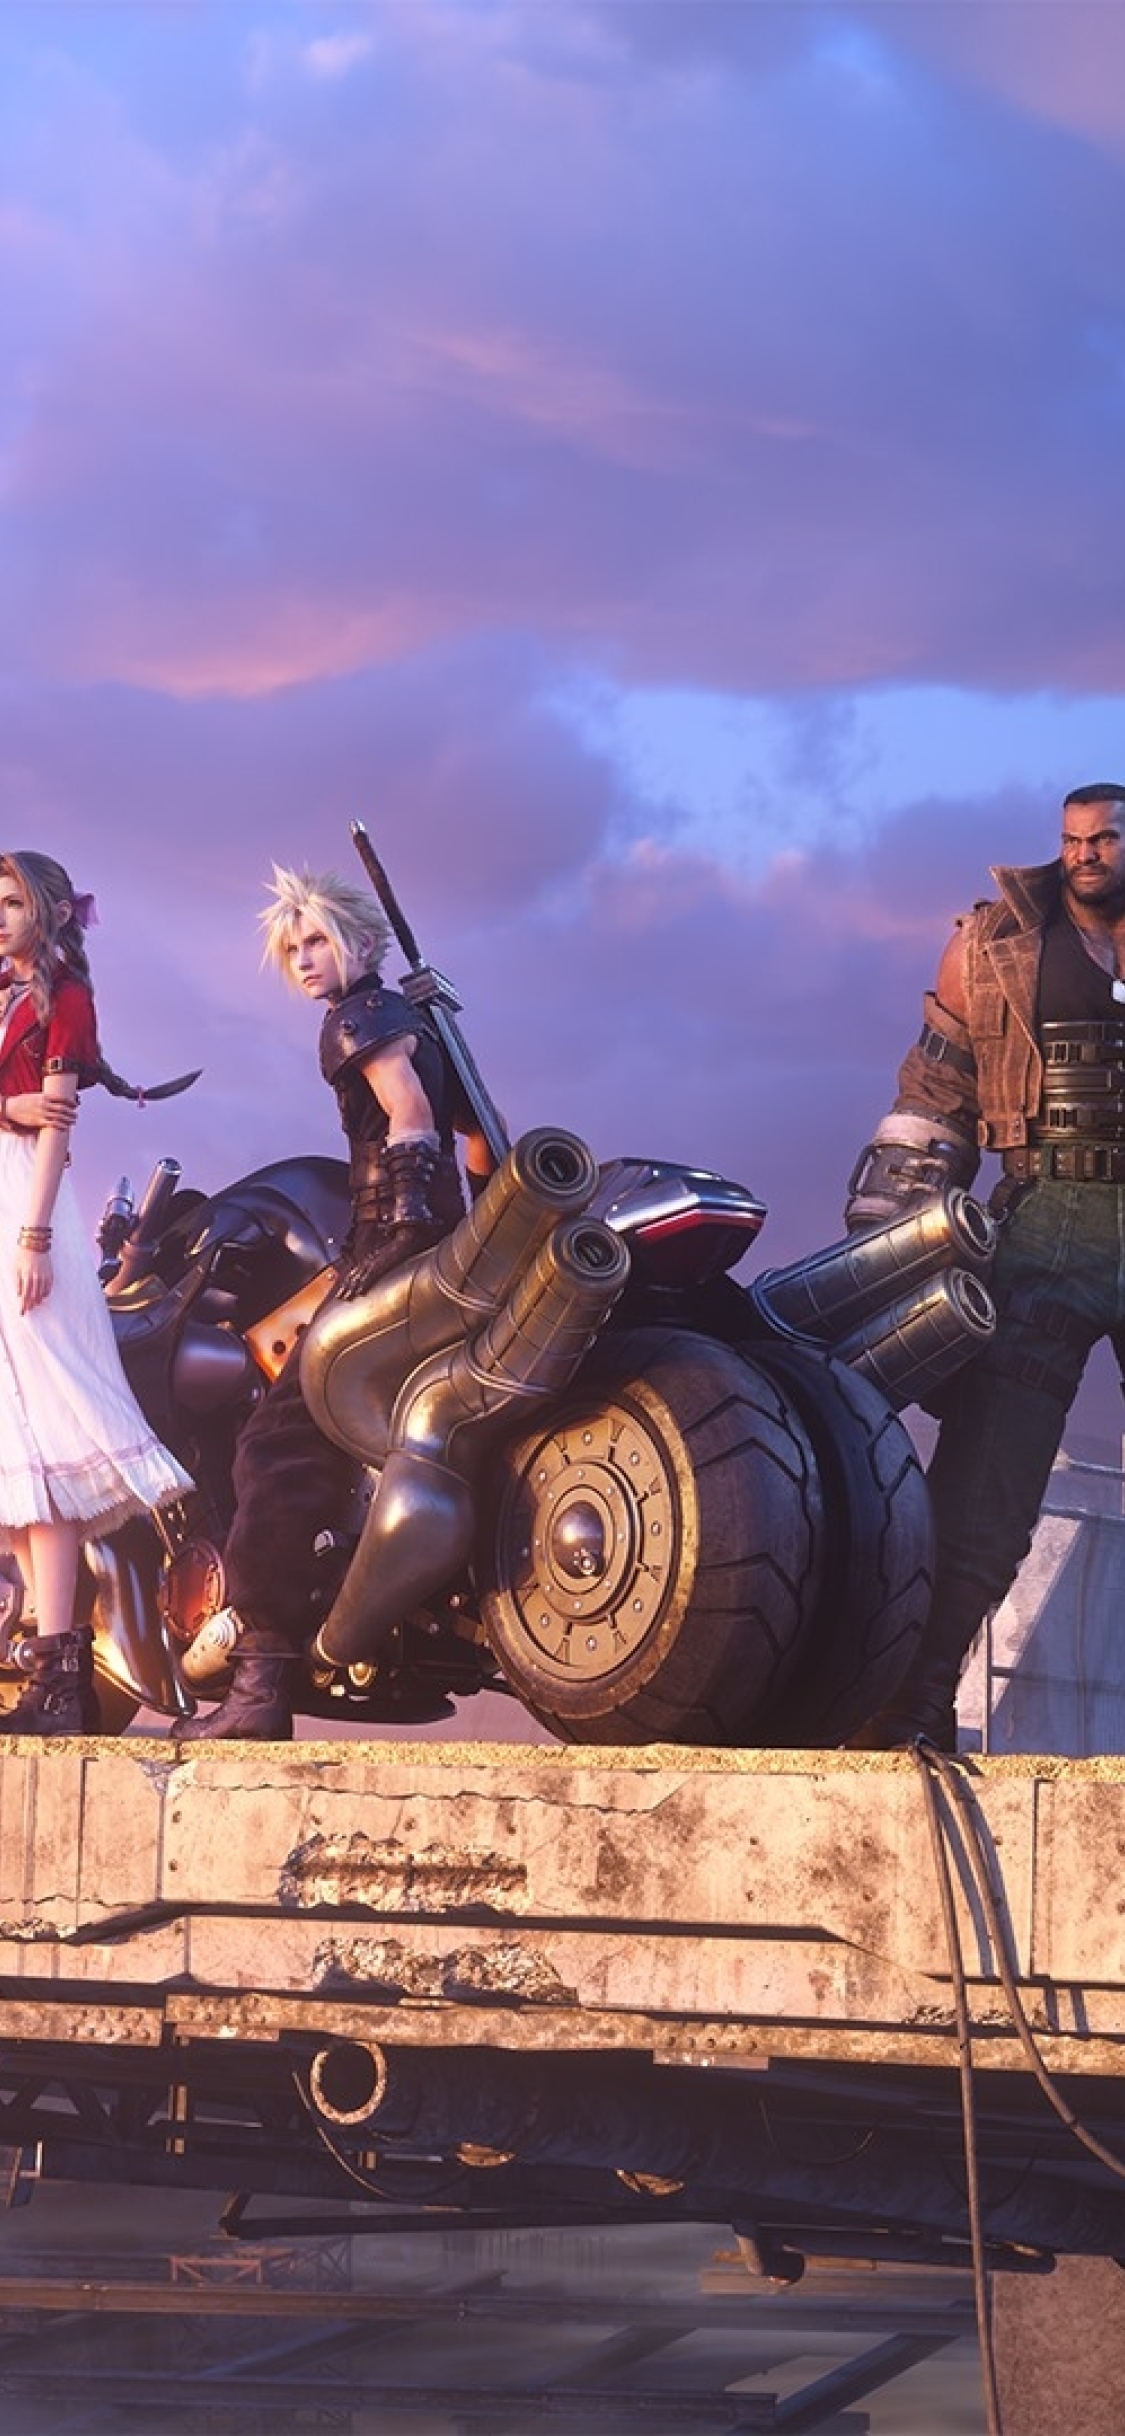 1125x2436 Final Fantasy 7 Remake Team Iphone Xs Iphone 10 Iphone X Wallpaper Hd Games 4k Wallpapers Images Photos And Background Wallpapers Den